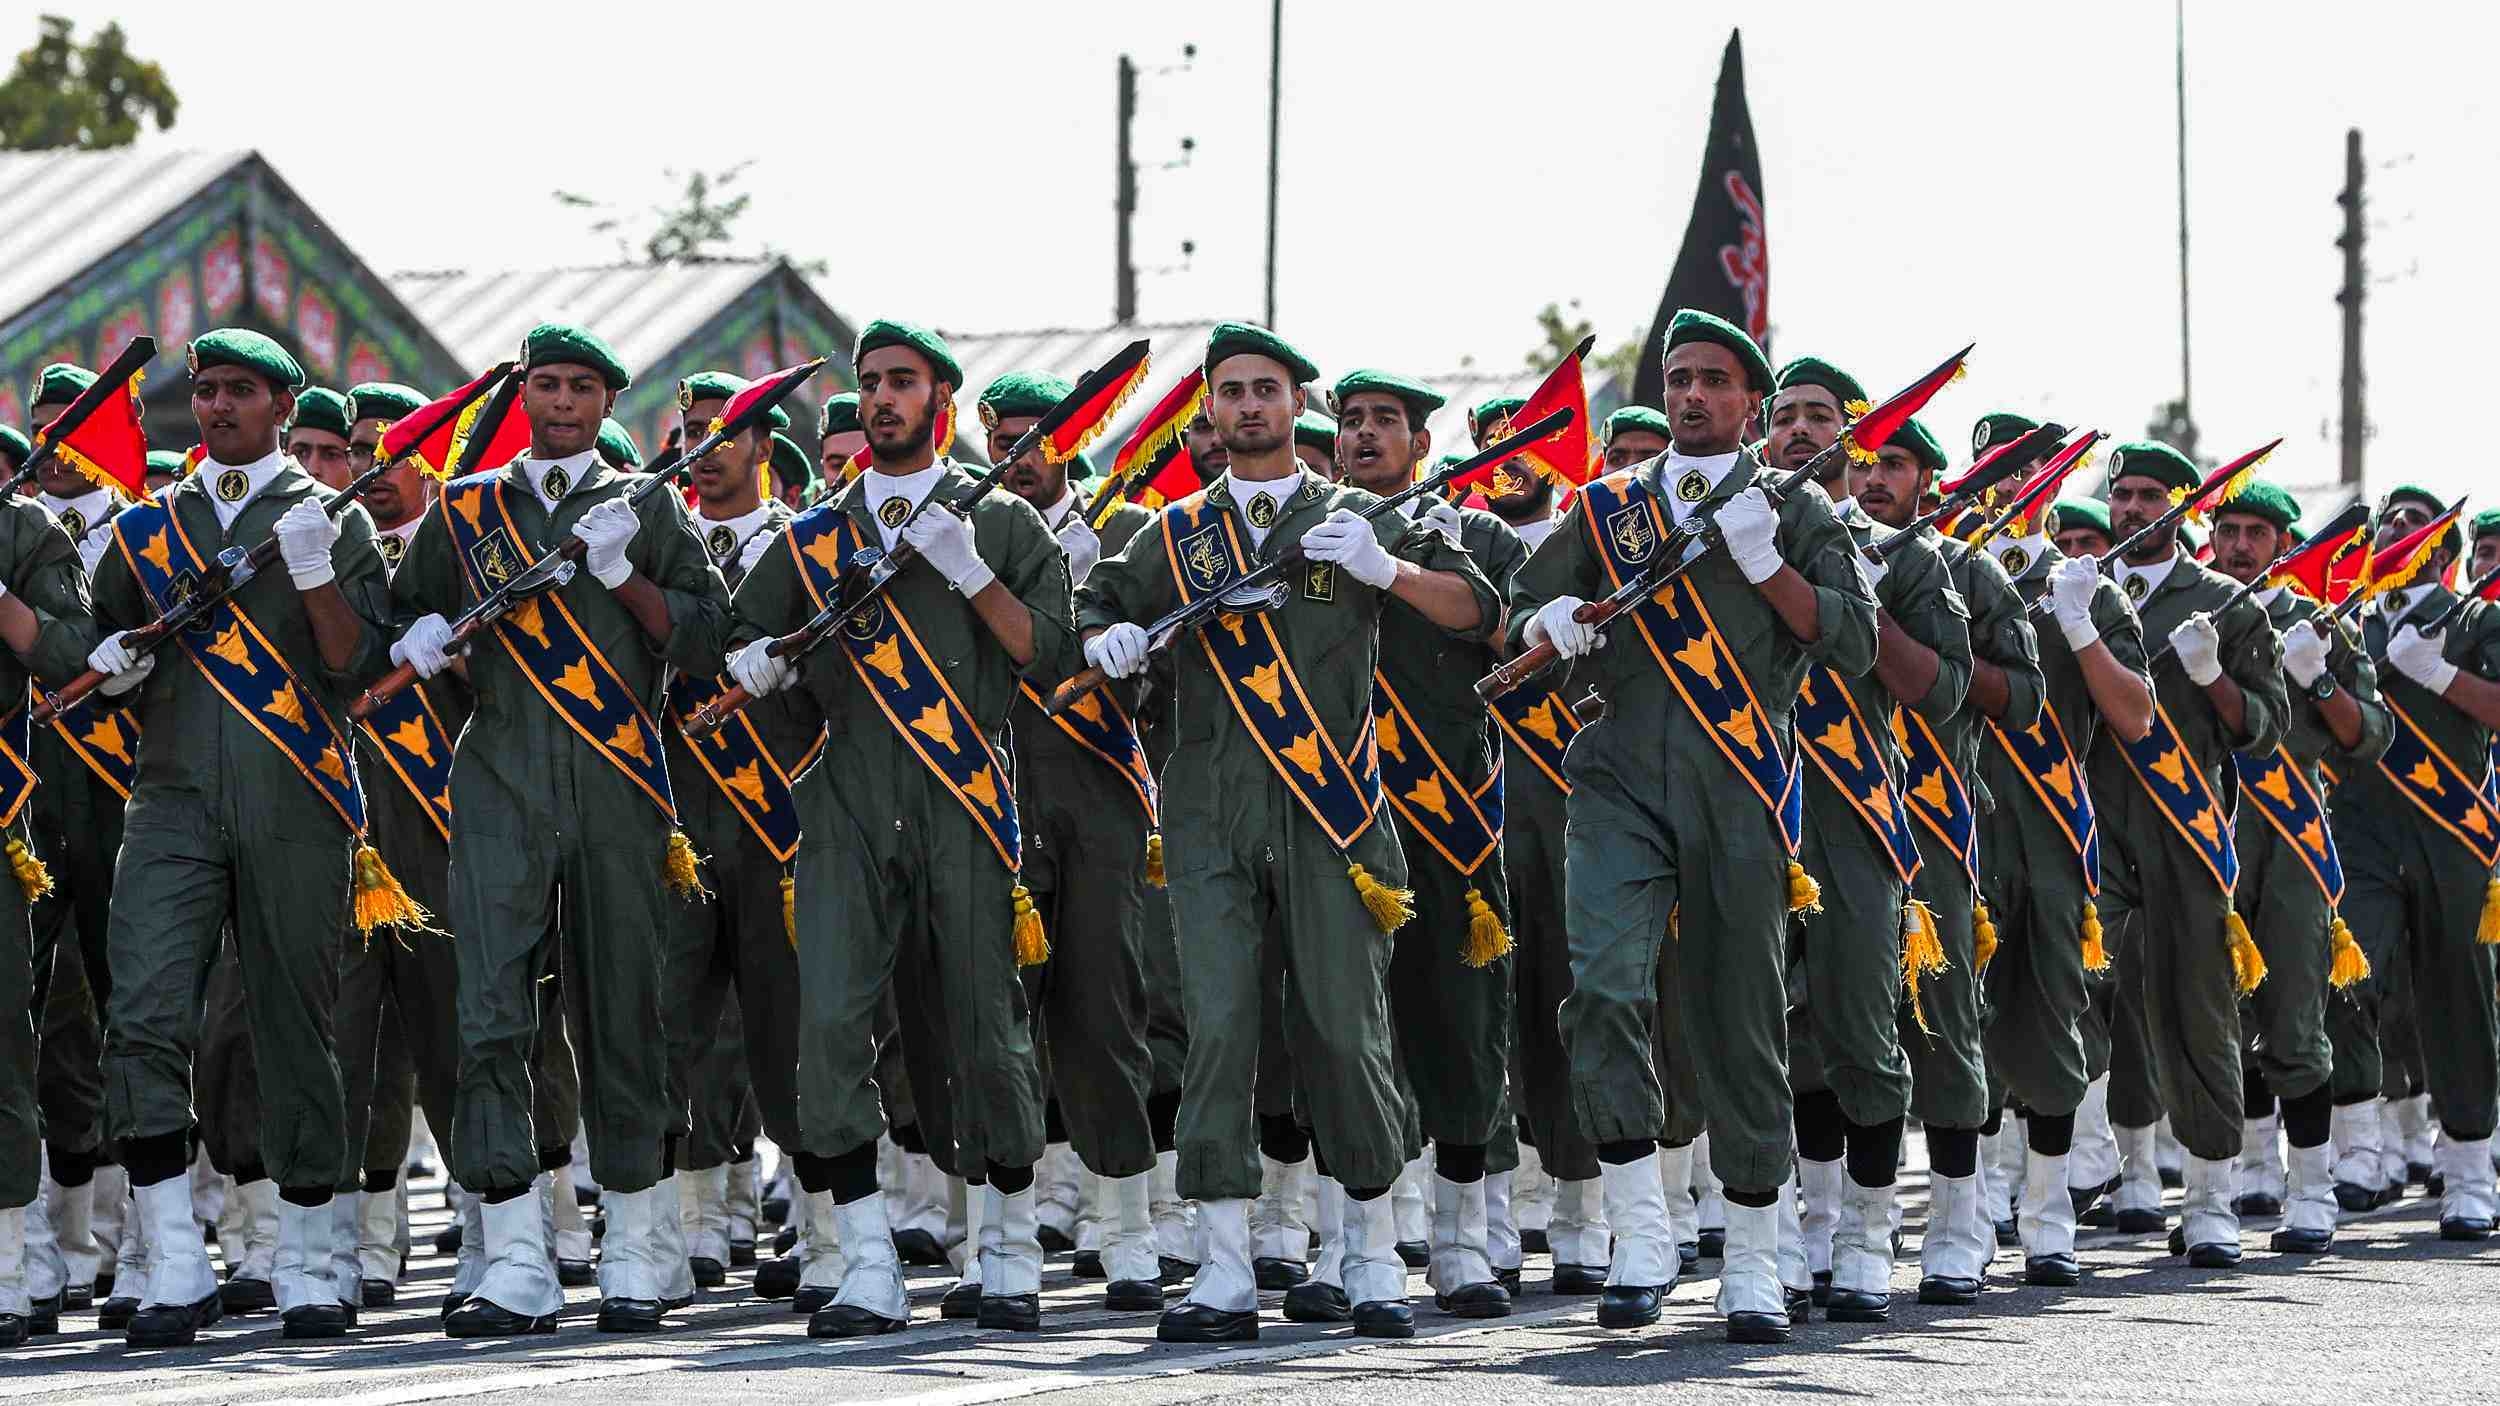 Members of Iran's Islamic Revolutionary Guard Corps march during the annual "Sacred Defence Week" military parade in the capital Tehran on 22 September 2019.